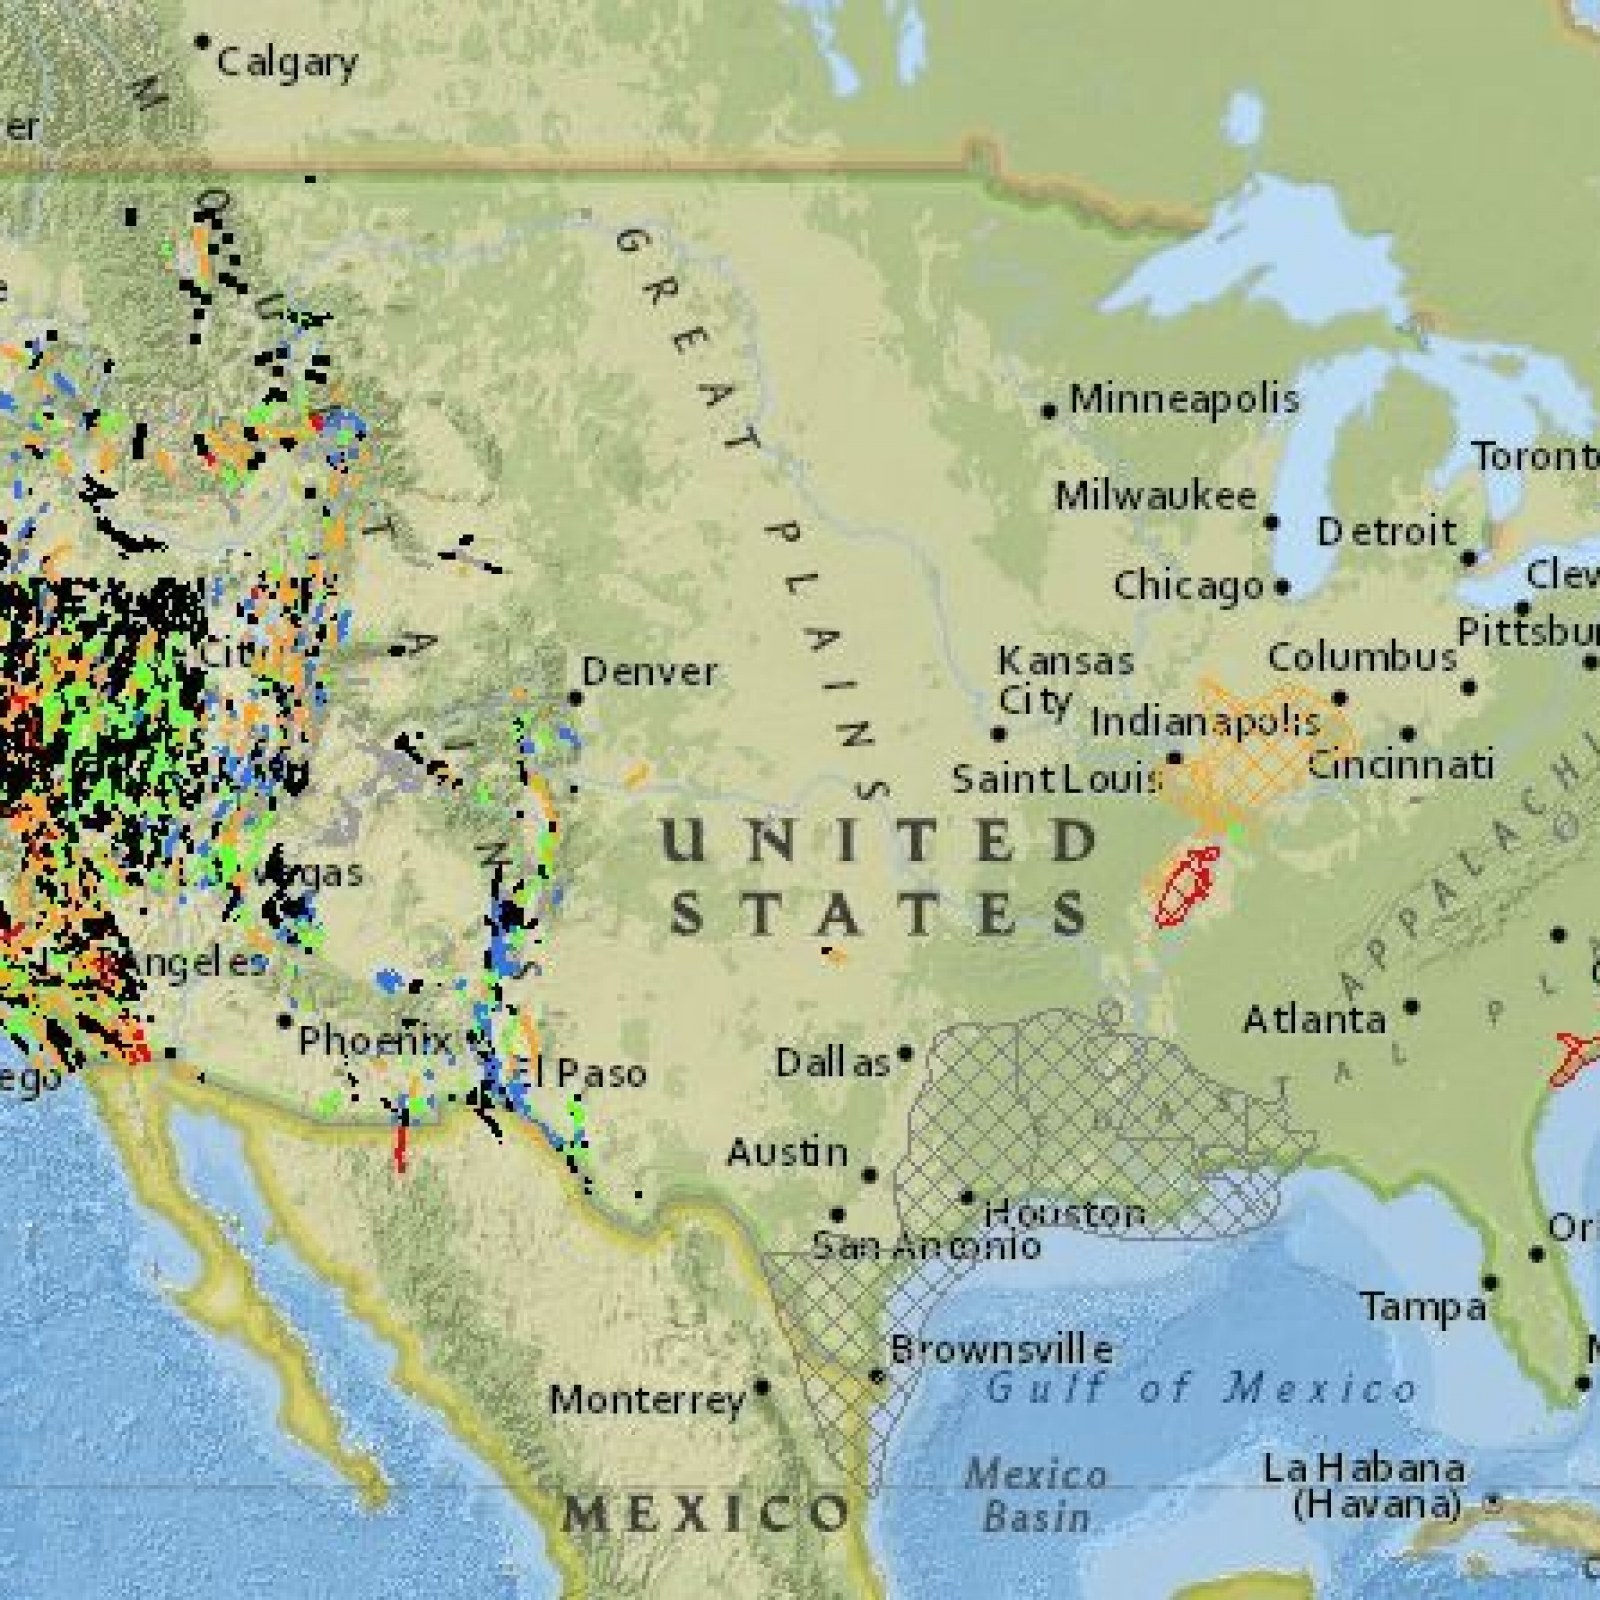 Earthquake Fault Lines United States - The Earth Images Revimage.Org